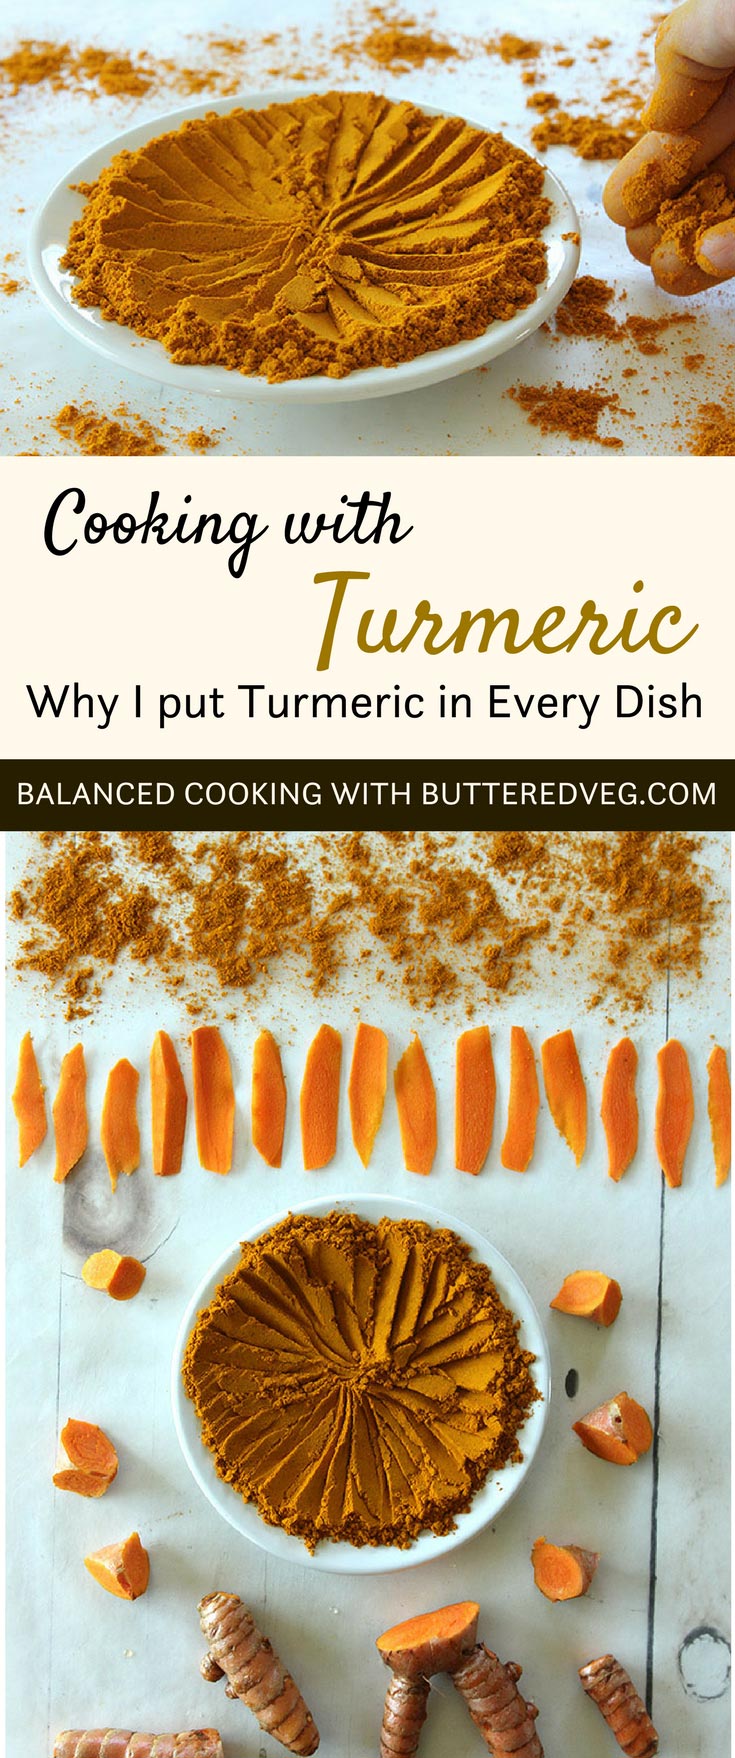 I Was Told to ‘Put Turmeric in Every Dish.’ Here\'s Why I’m Glad I Listened!